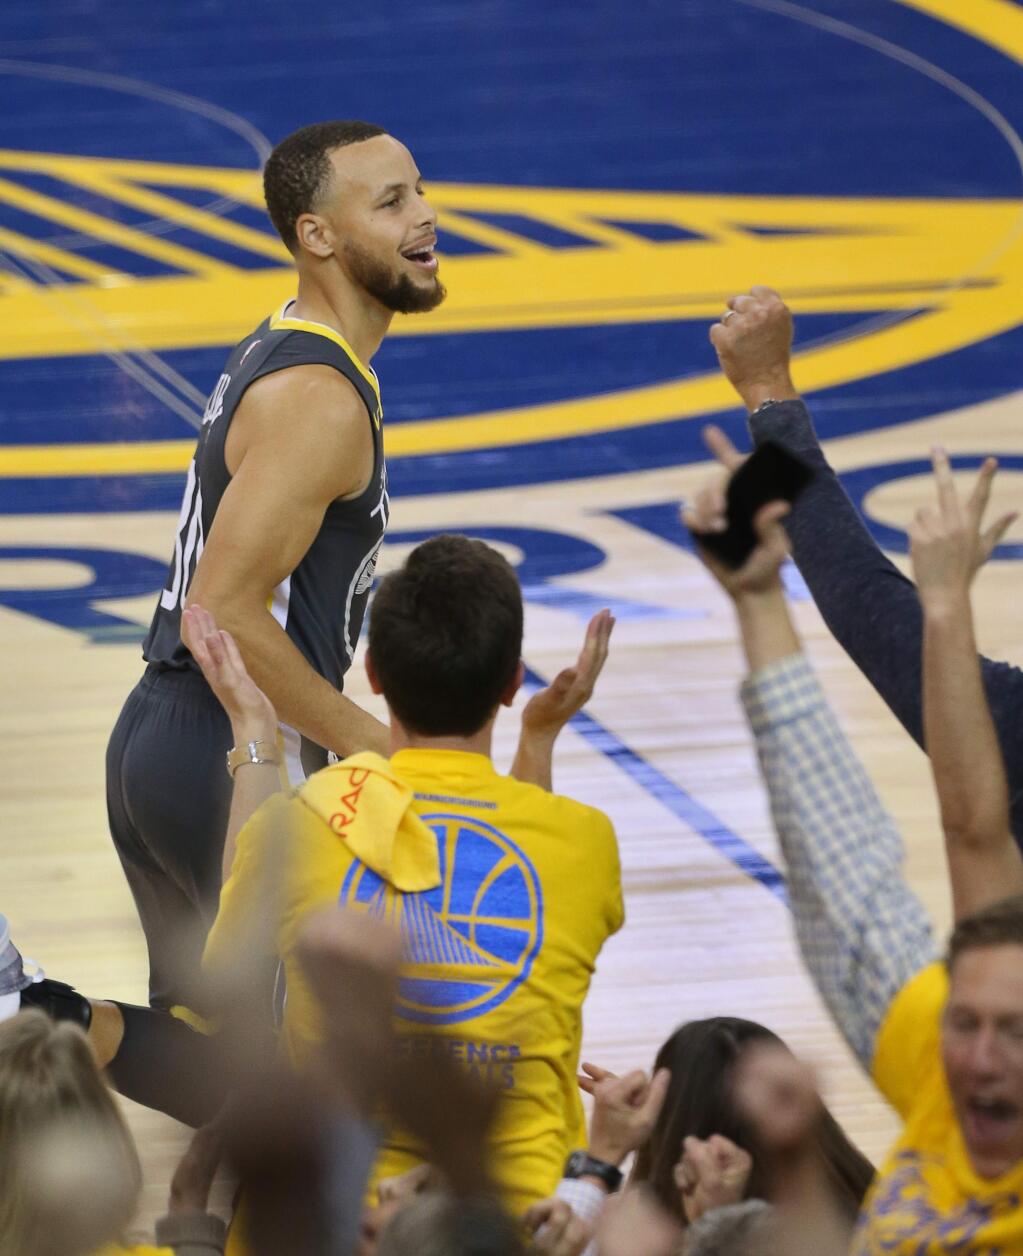 Golden State Warriors guard Stephen Curry celebrates his first three-pointer since coming back from injury against the New Orleans Pelicans, during their game in Oakland on Tuesday, May 1, 2018. (Christopher Chung / The Press Democrat)